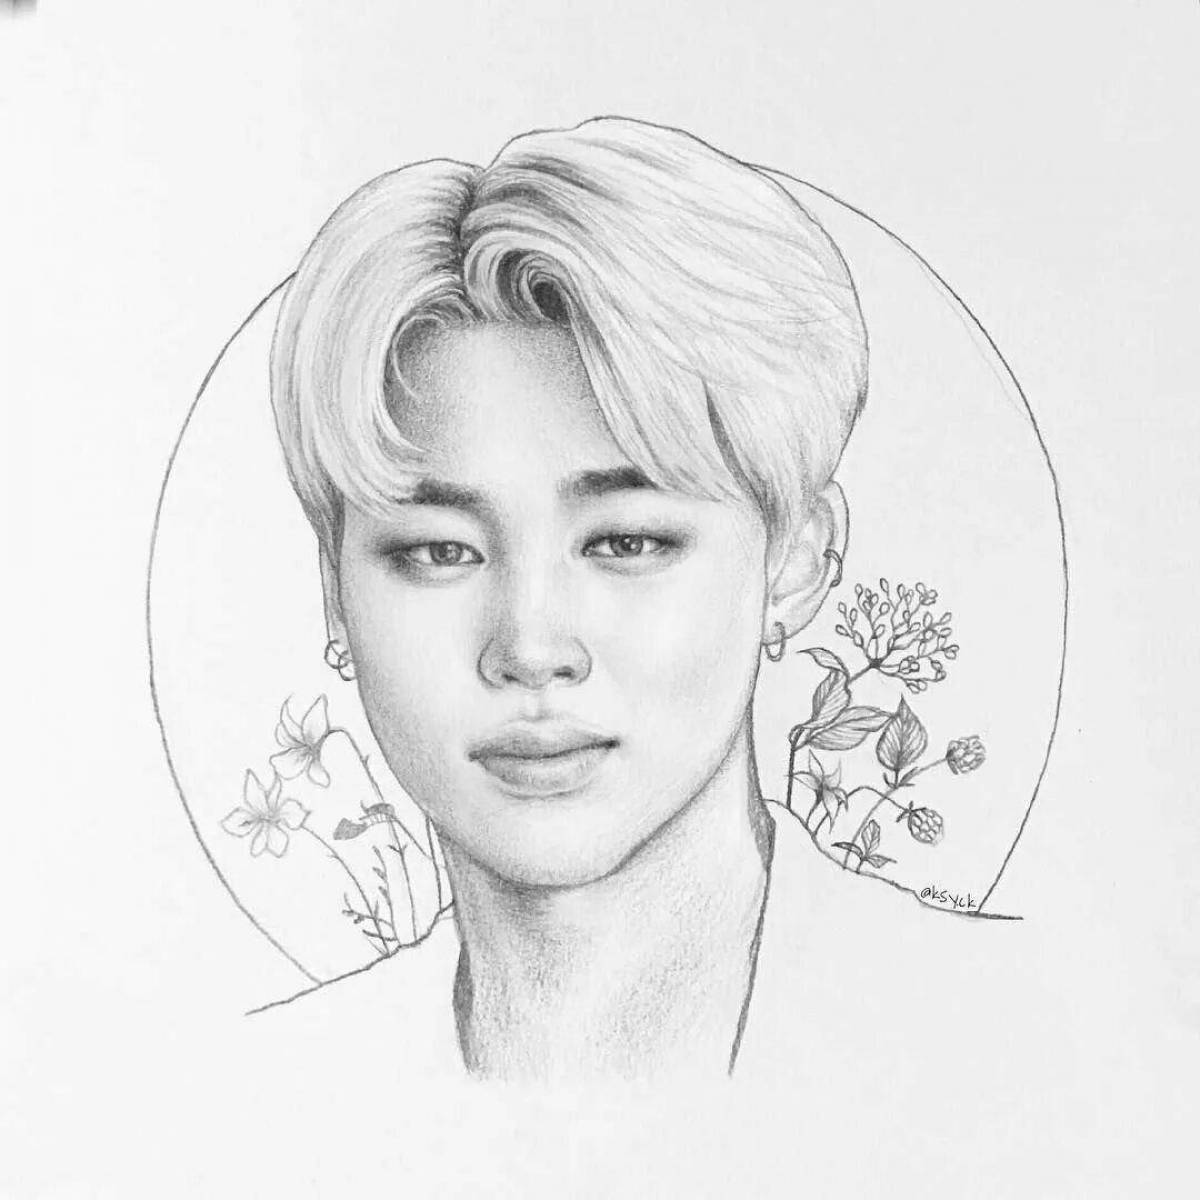 Park jimin's sexy coloring book